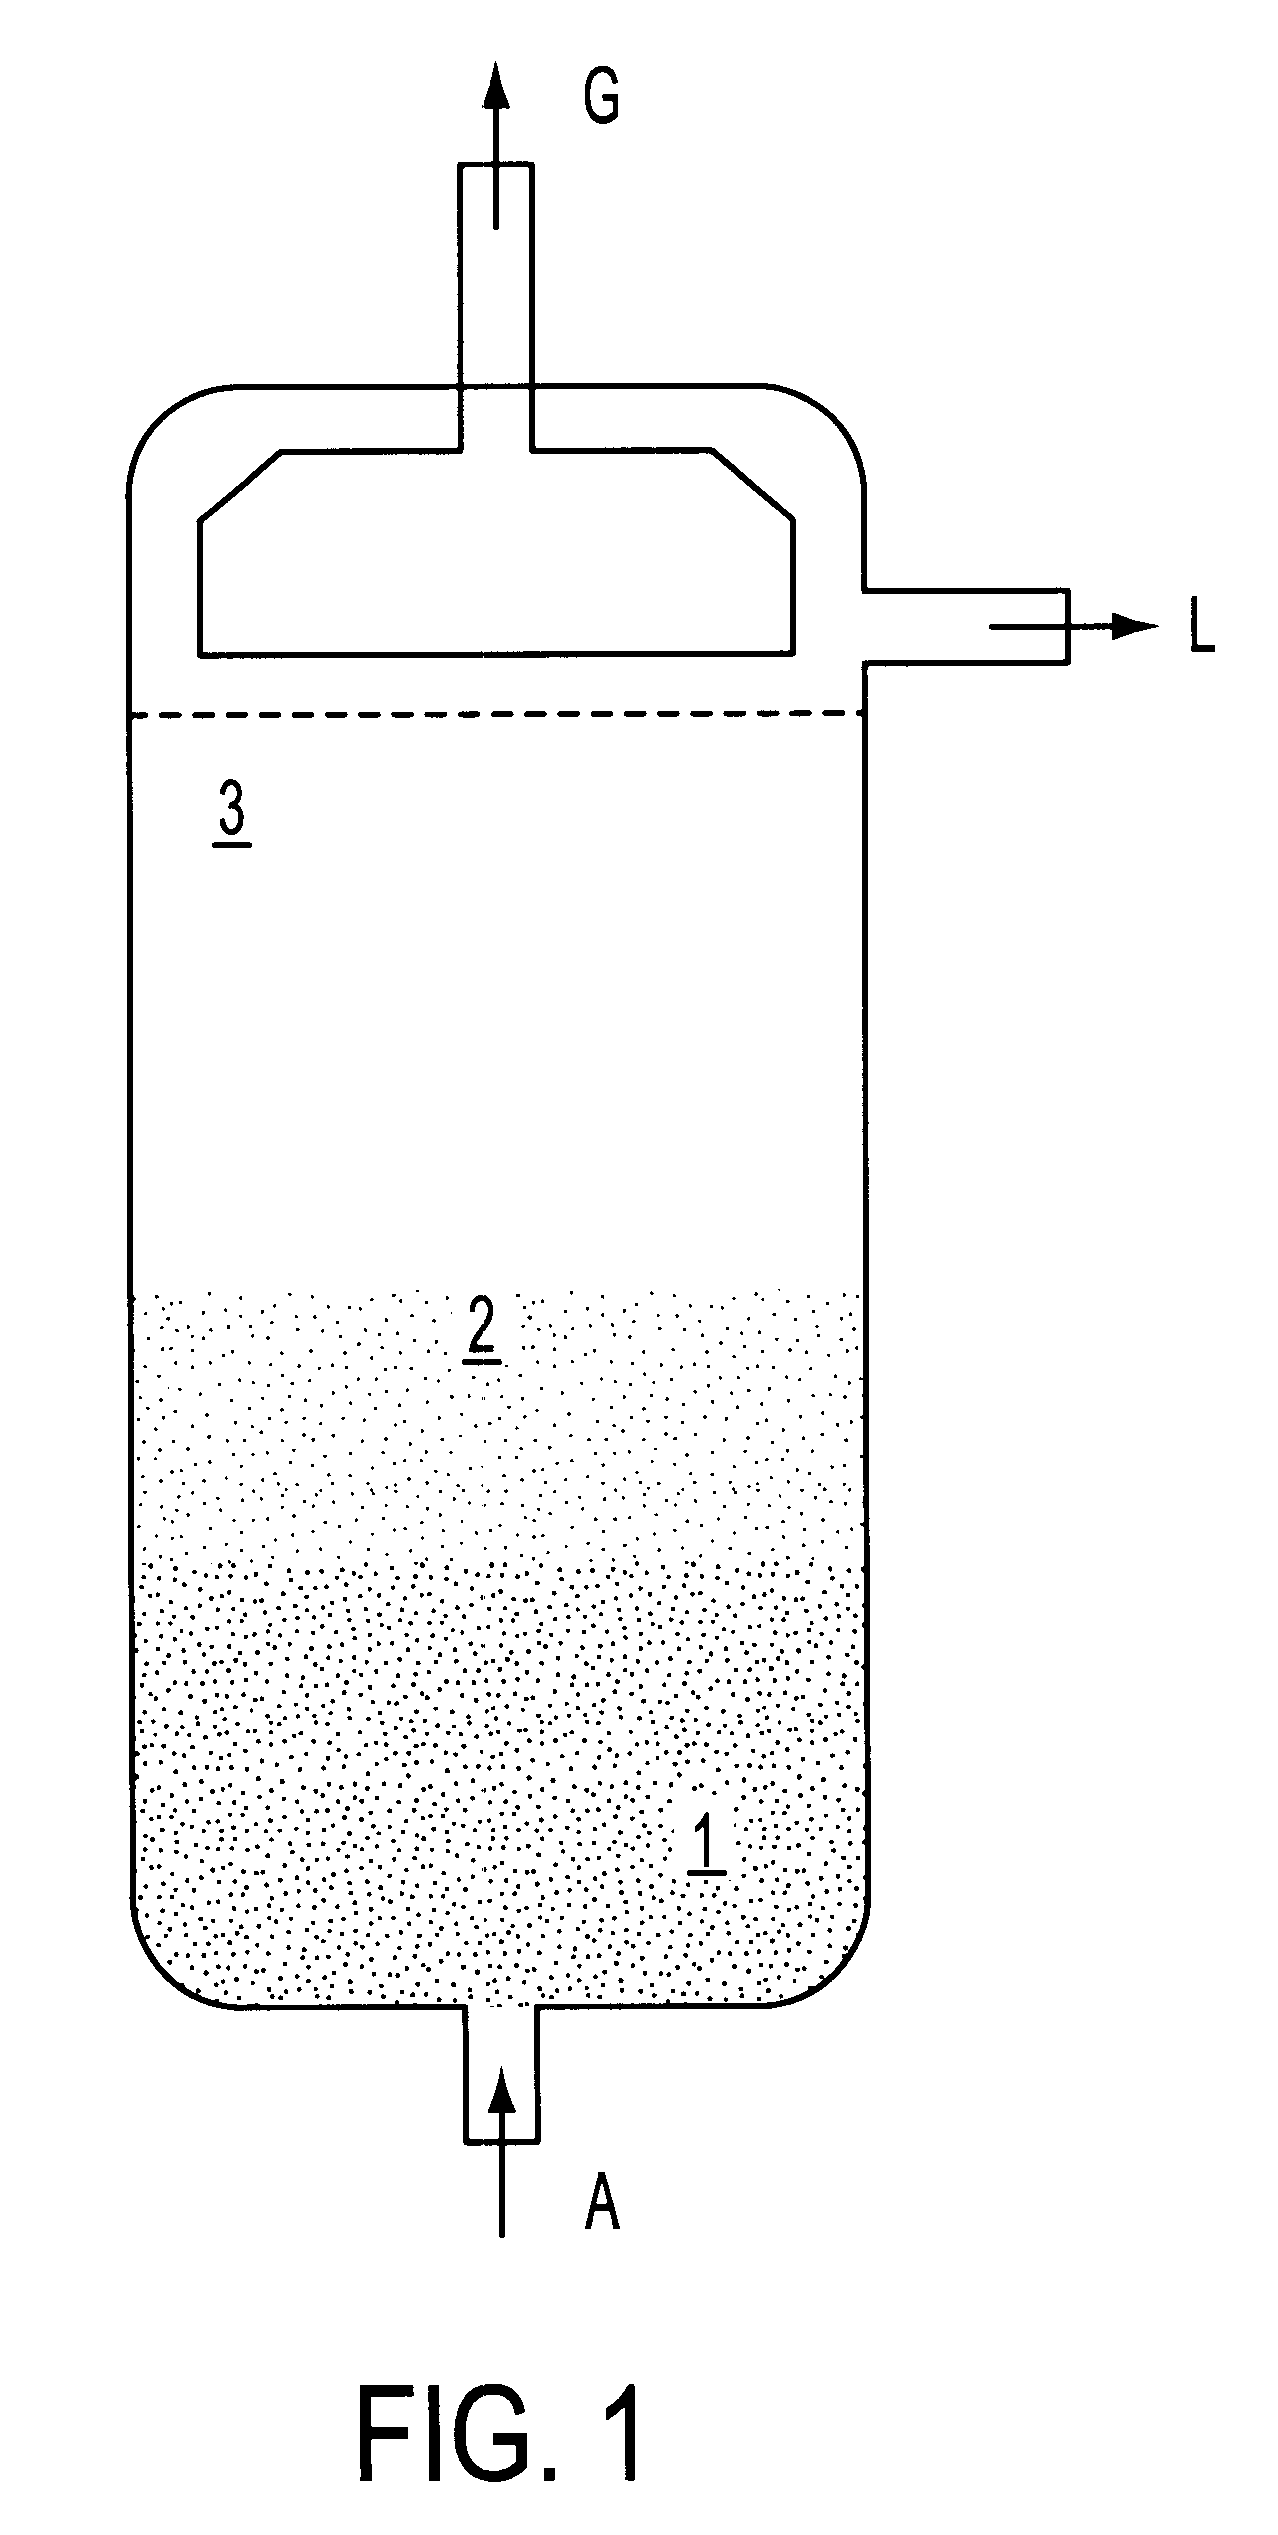 Method for processing lignocellulosic material